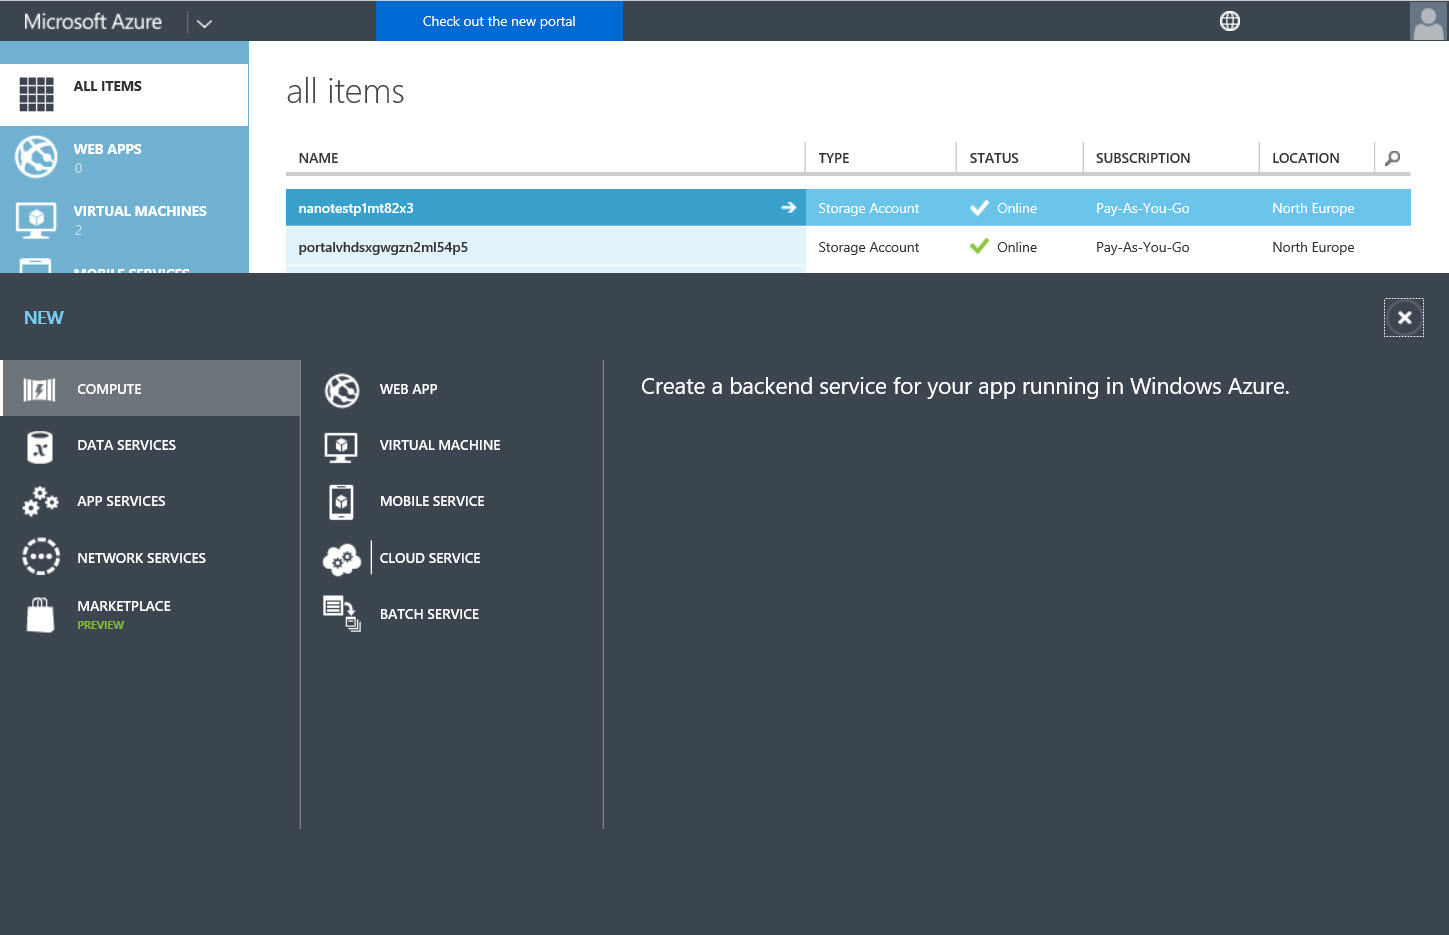 Deploy Windows Server 2016 TP4 Nano in an Azure VM (Image Credit: Russell Smith)